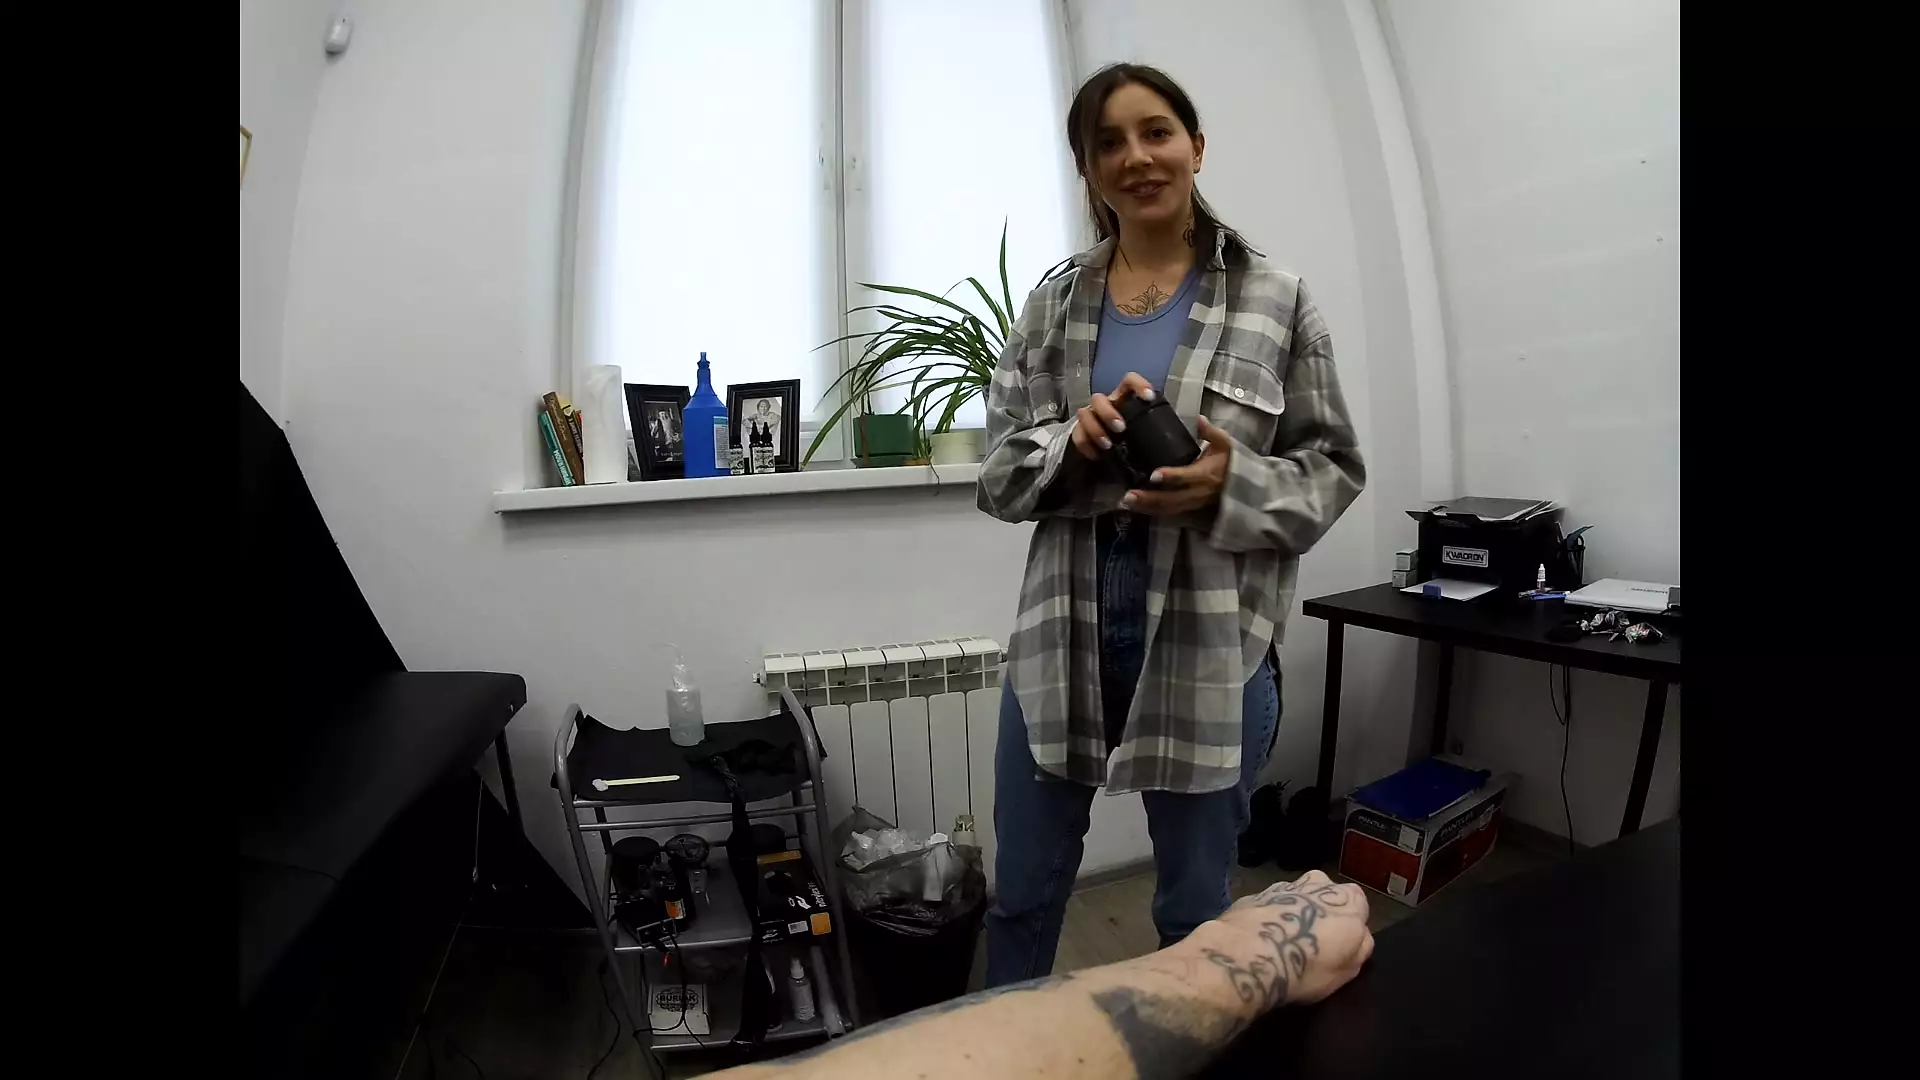 Real Sex with a tattoo artist! She fucks with clients! pic